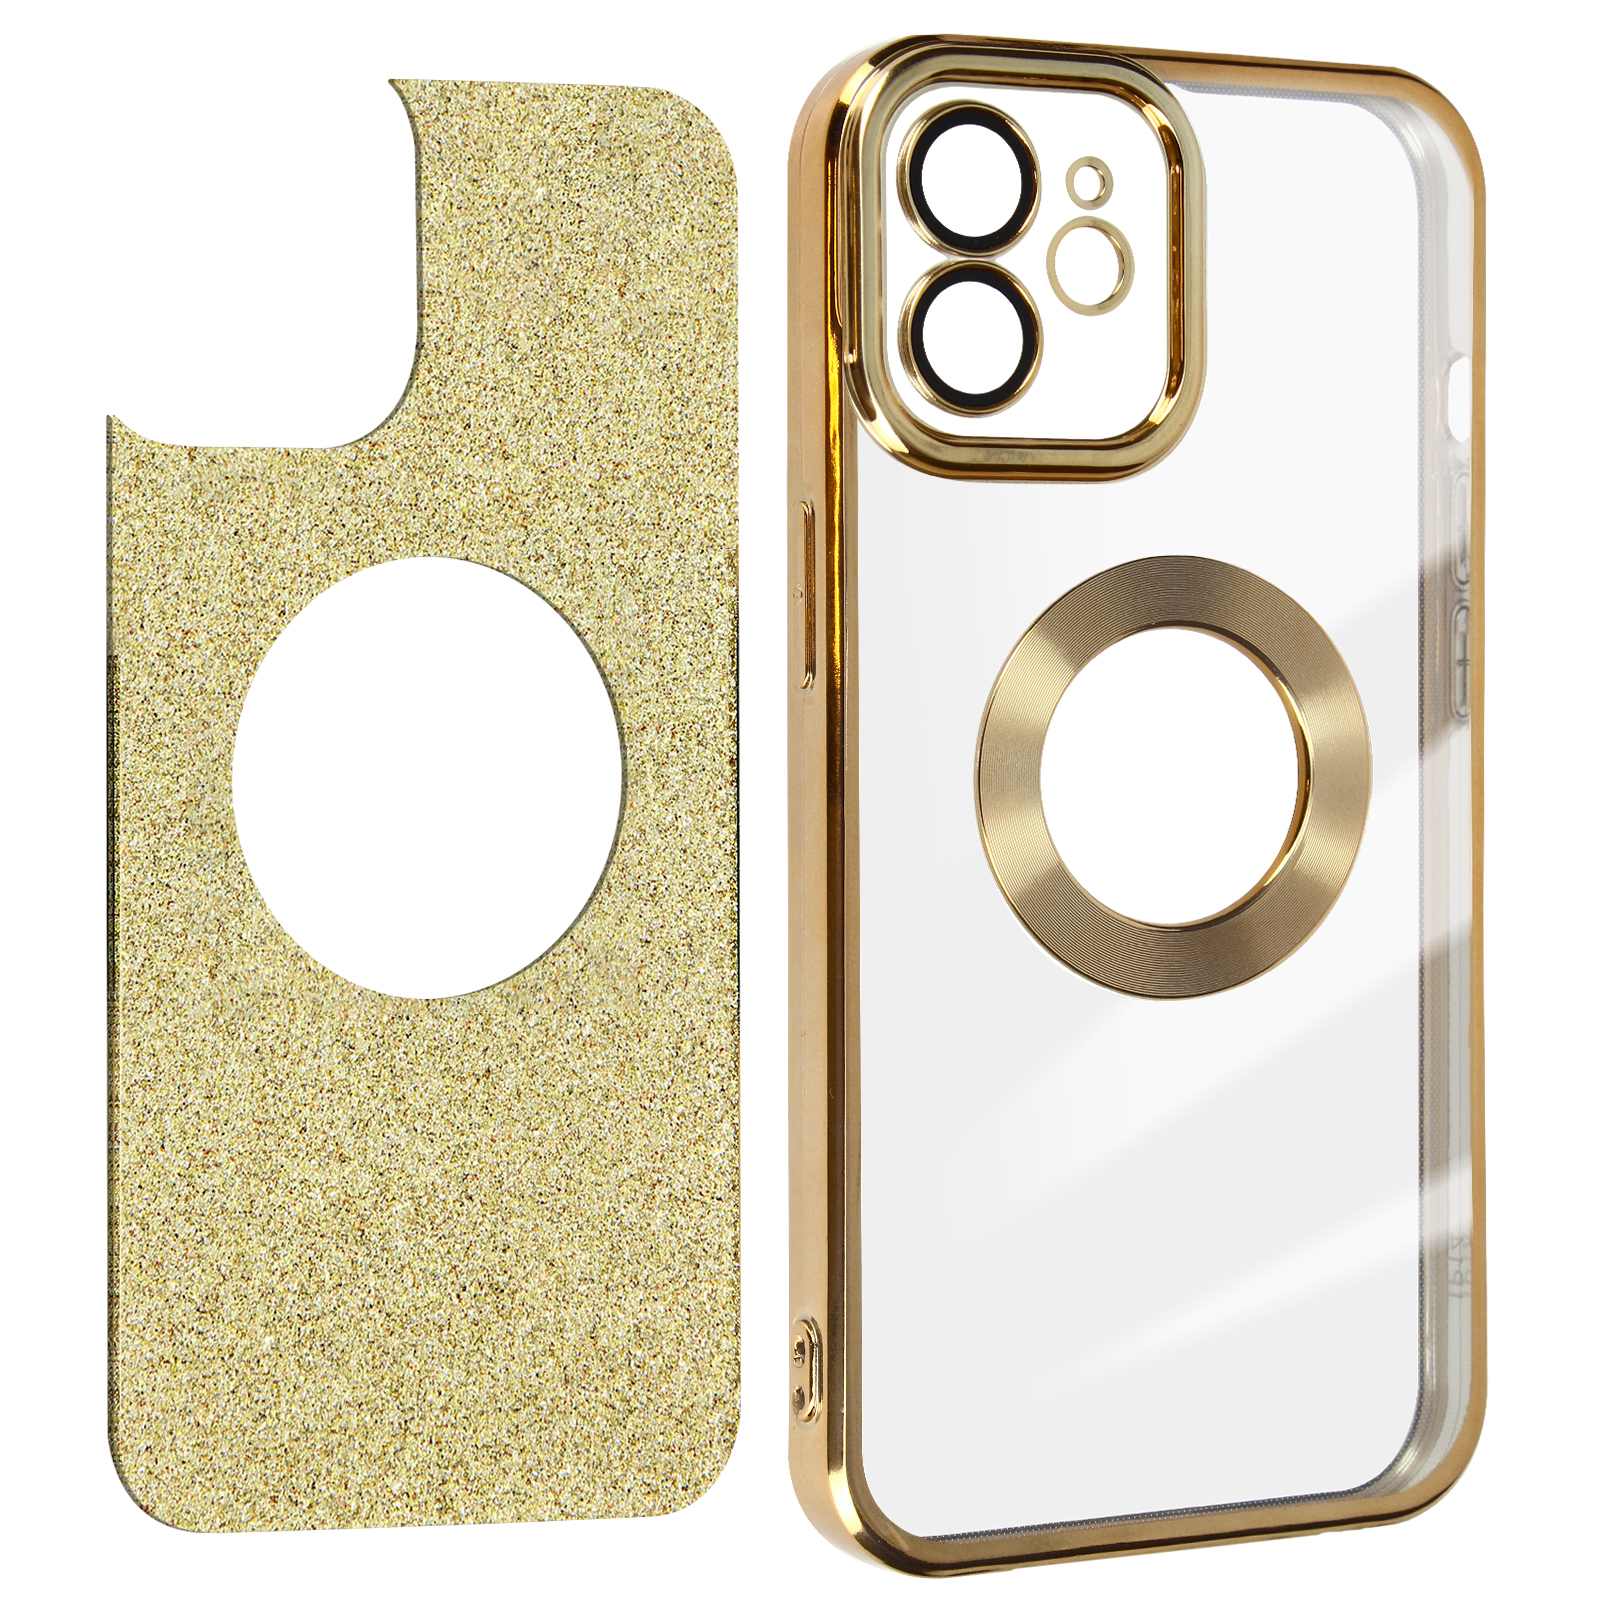 AVIZAR Protecam Spark 12 Backcover, Gold iPhone Pro, Apple, Series